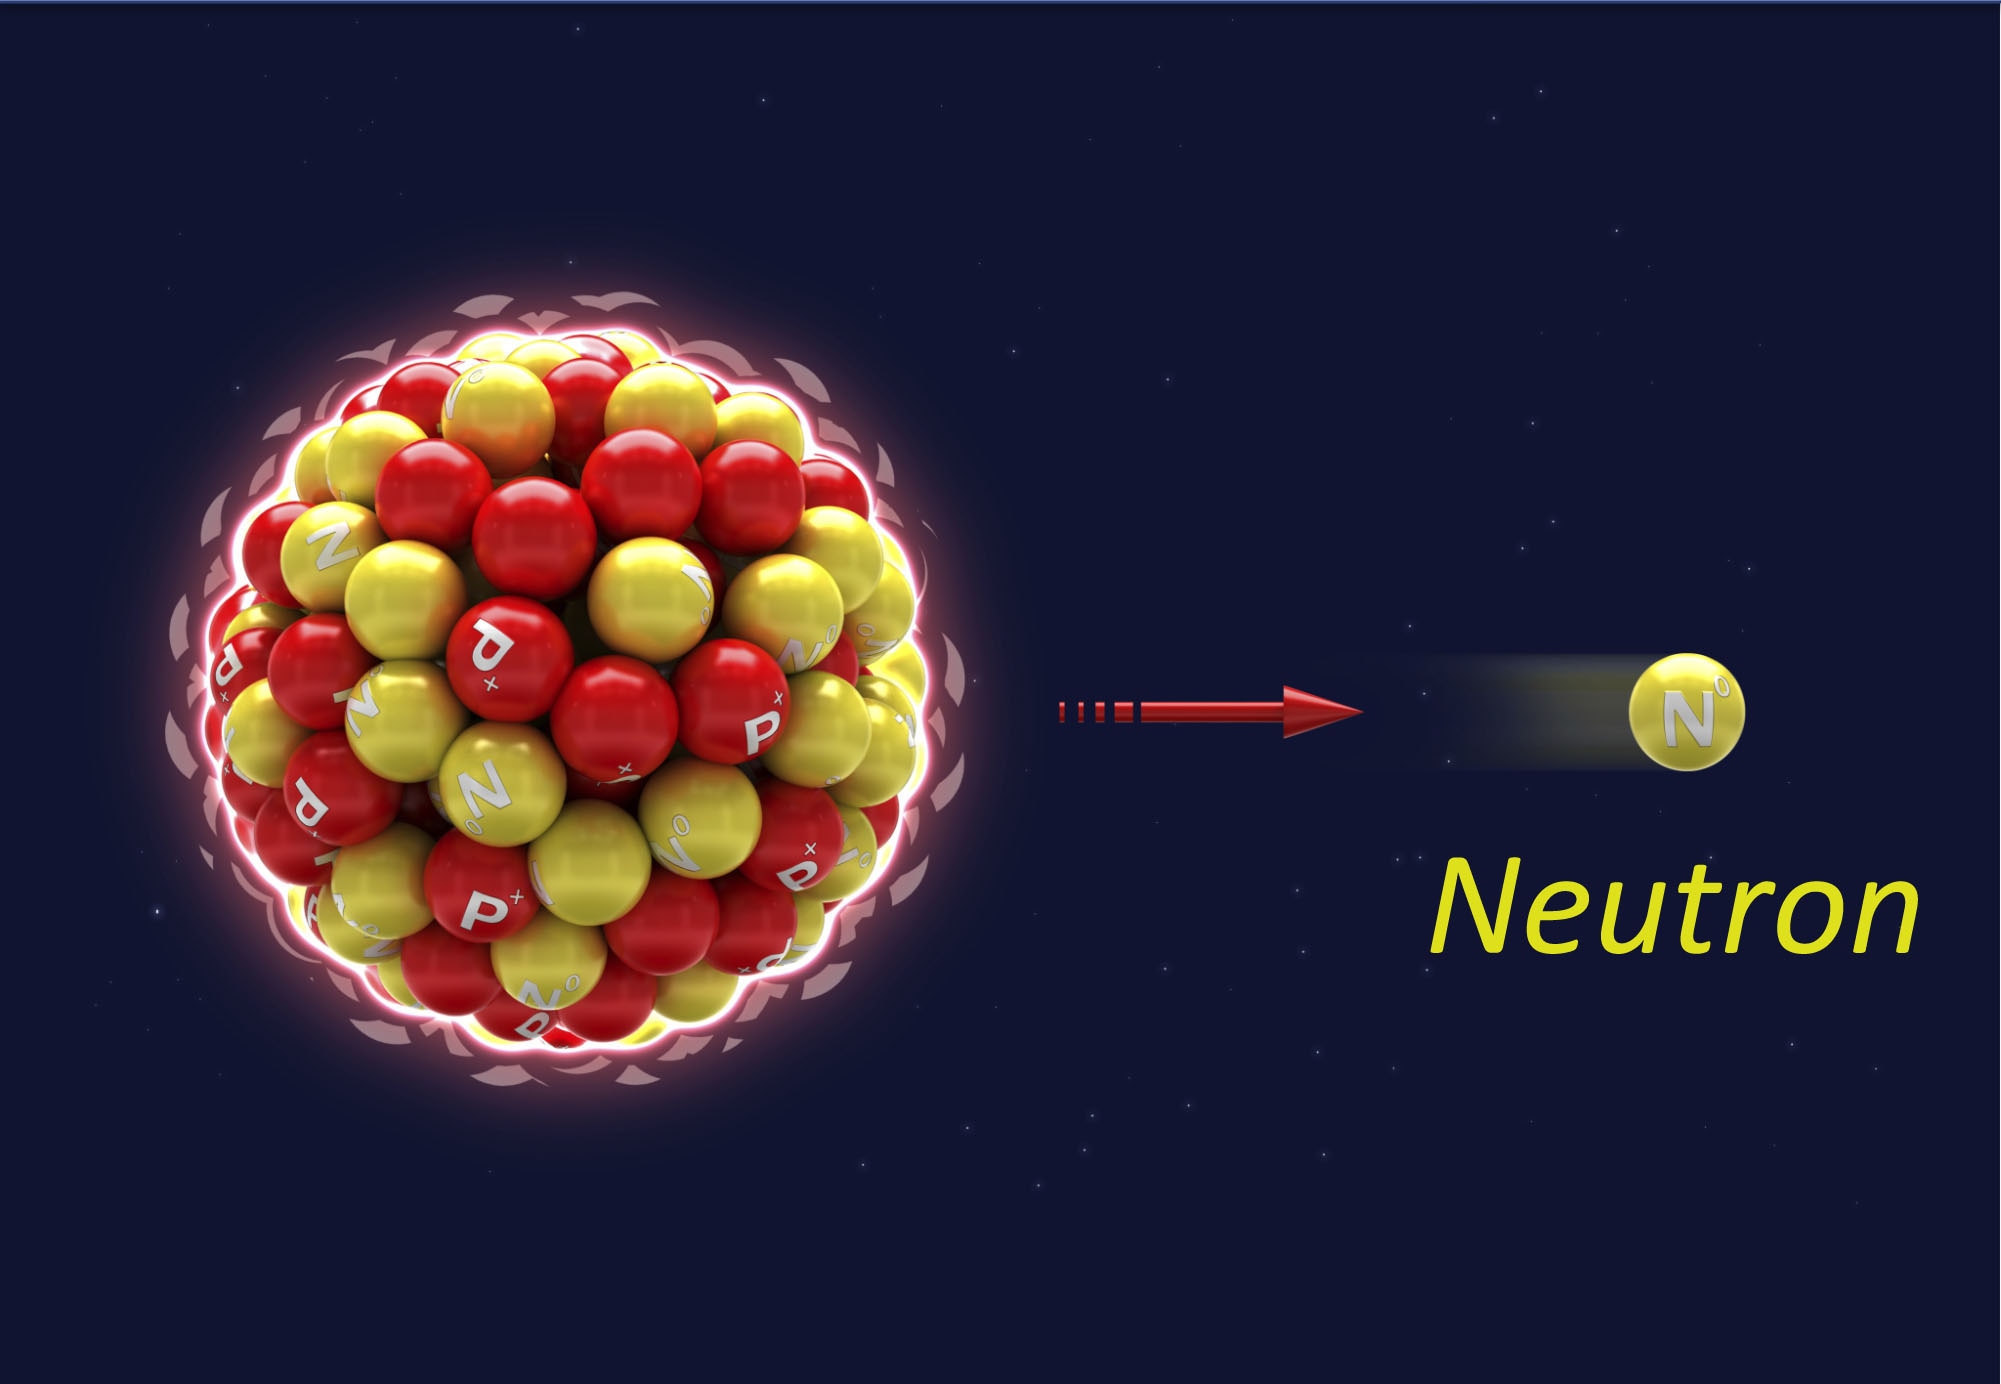 Illustration of neutron being ejected from nucleus of atom